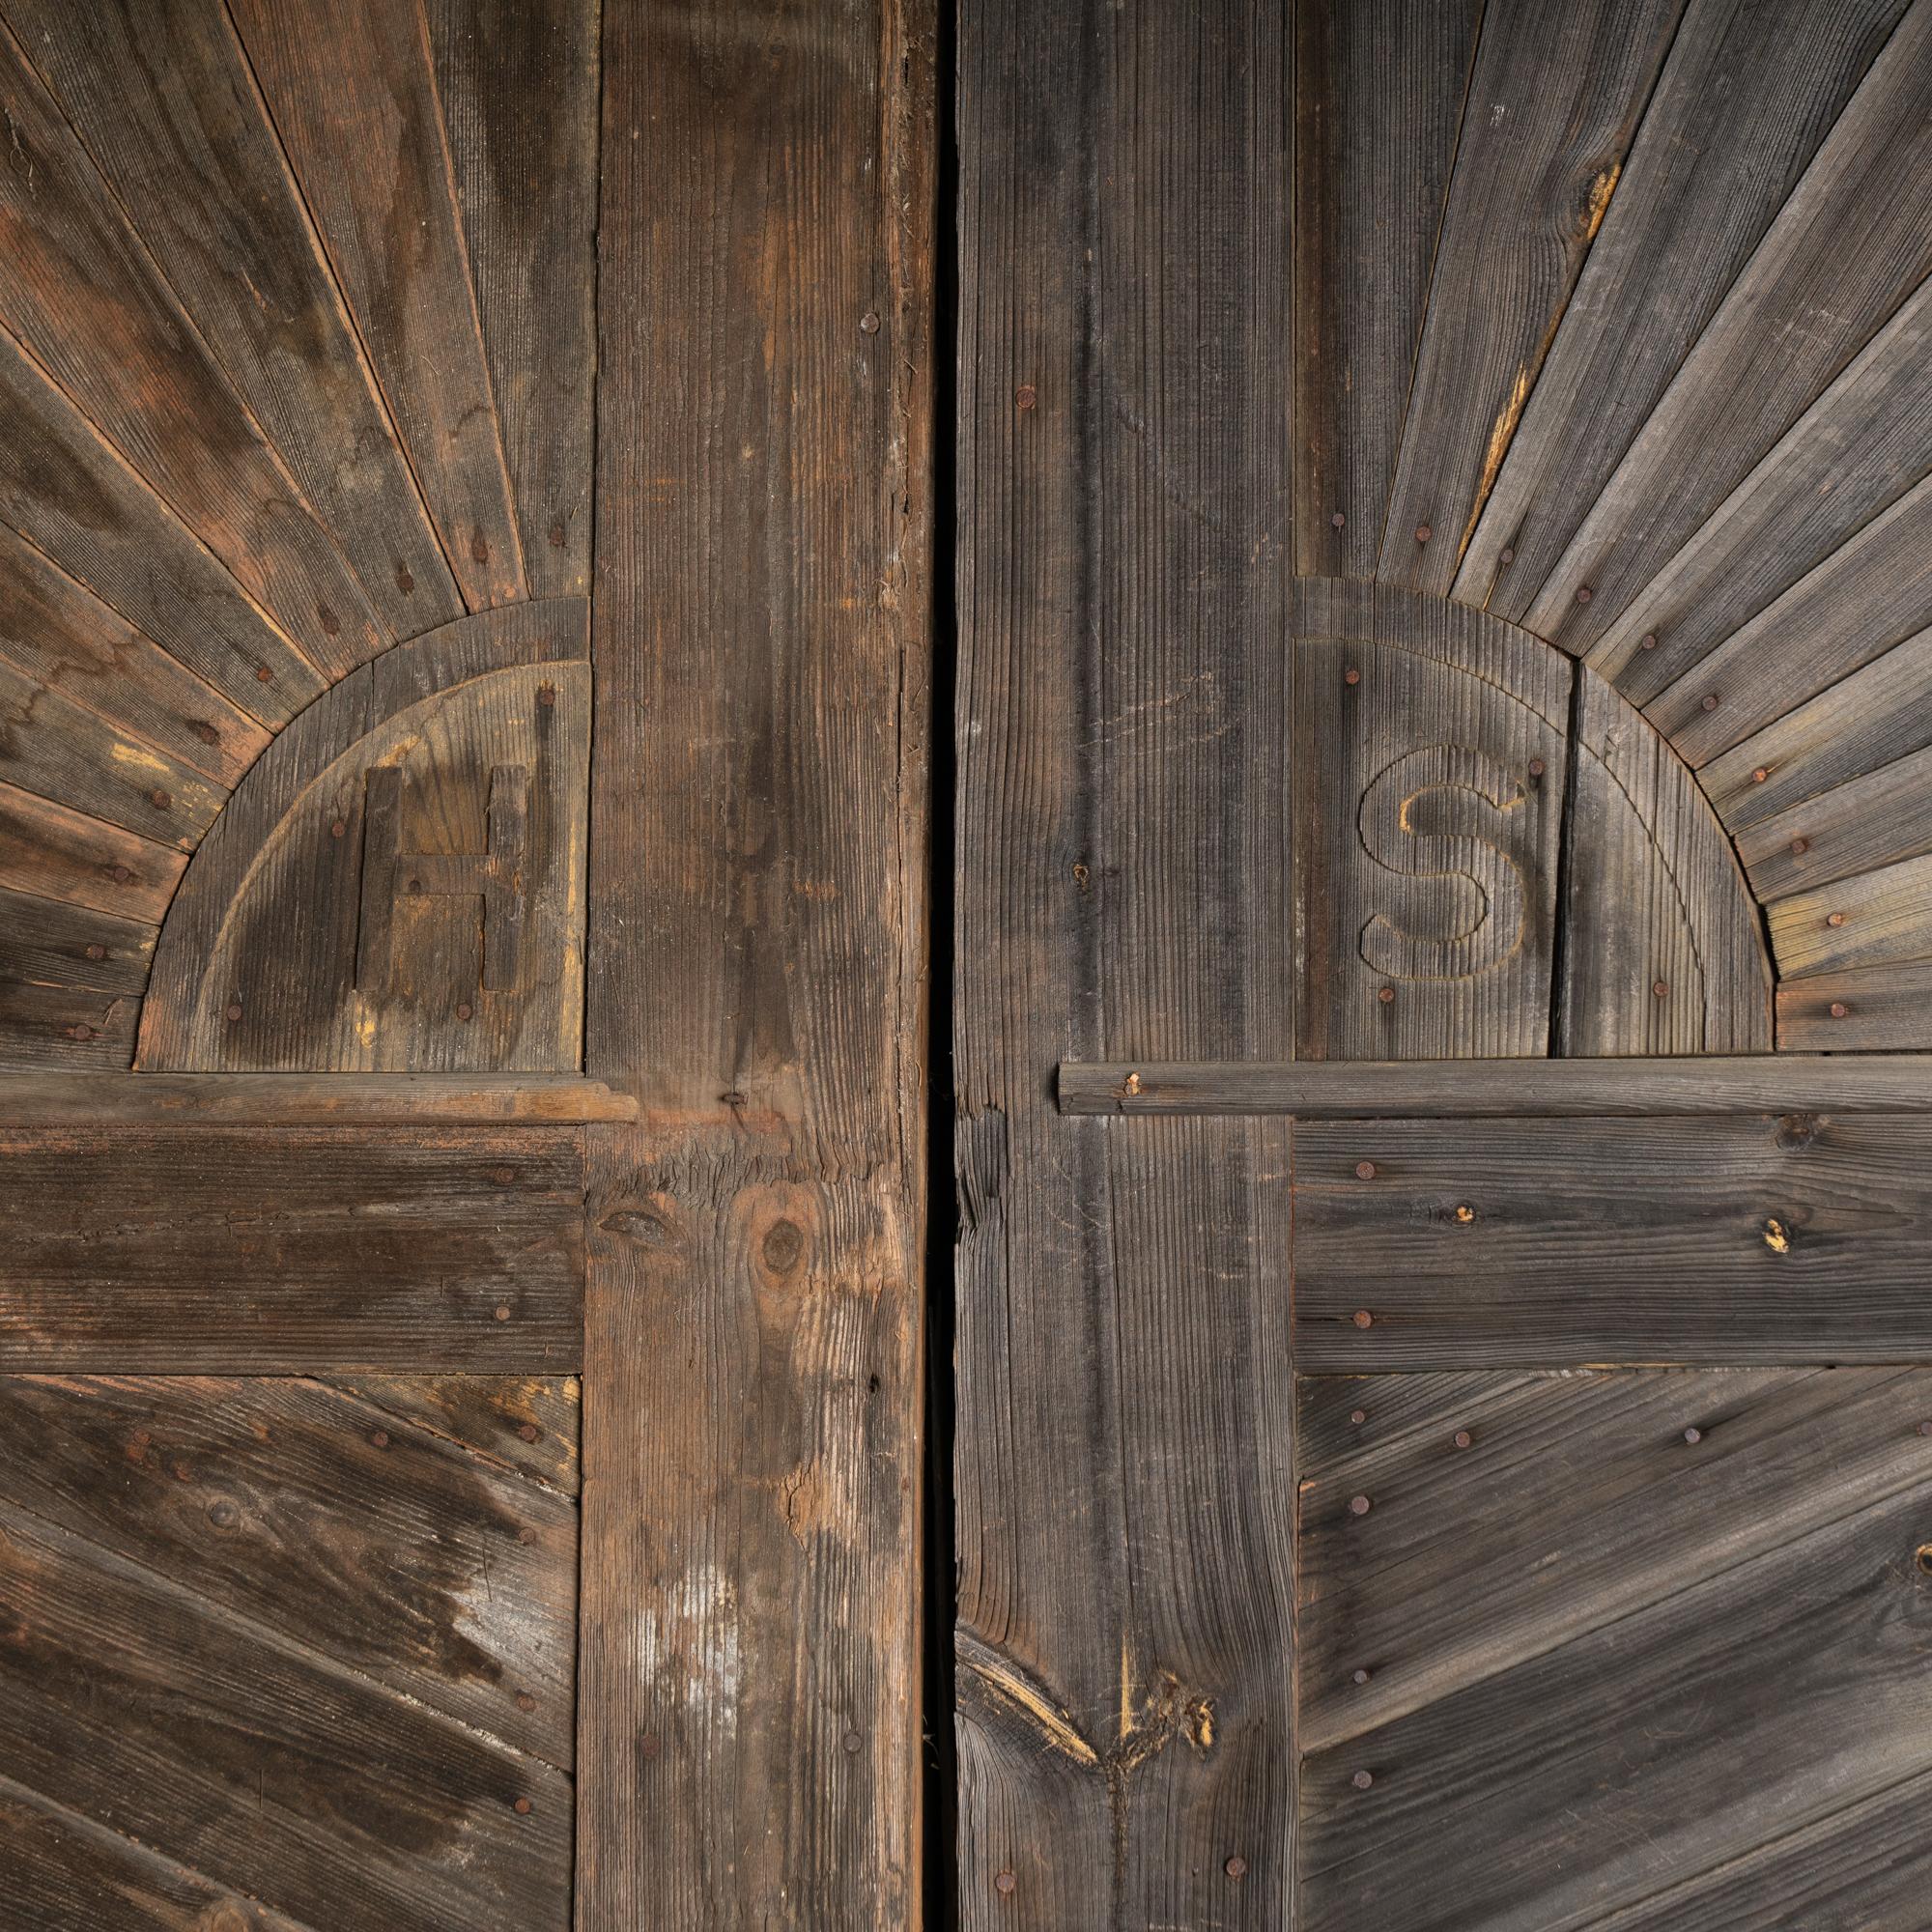 Rustic Huge Architectural Salvaged Barn Doors With Sunburst, Hungary circa 1840-60